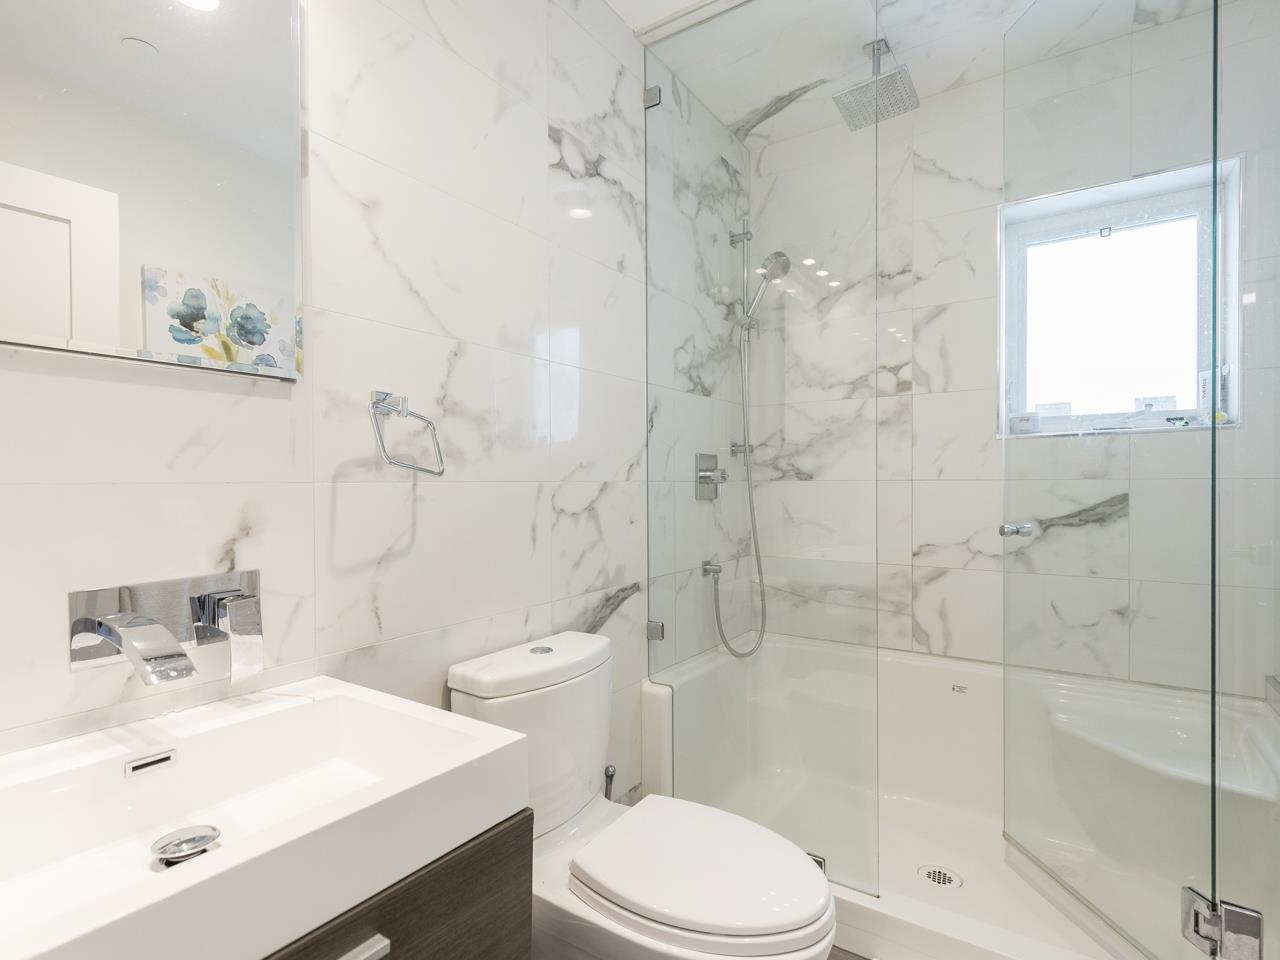 This is a semi ensuite for the master bedroom. Connects through laundry area and is finished to highest standard with huge walk-in shower and beautiful tiled surrounds.